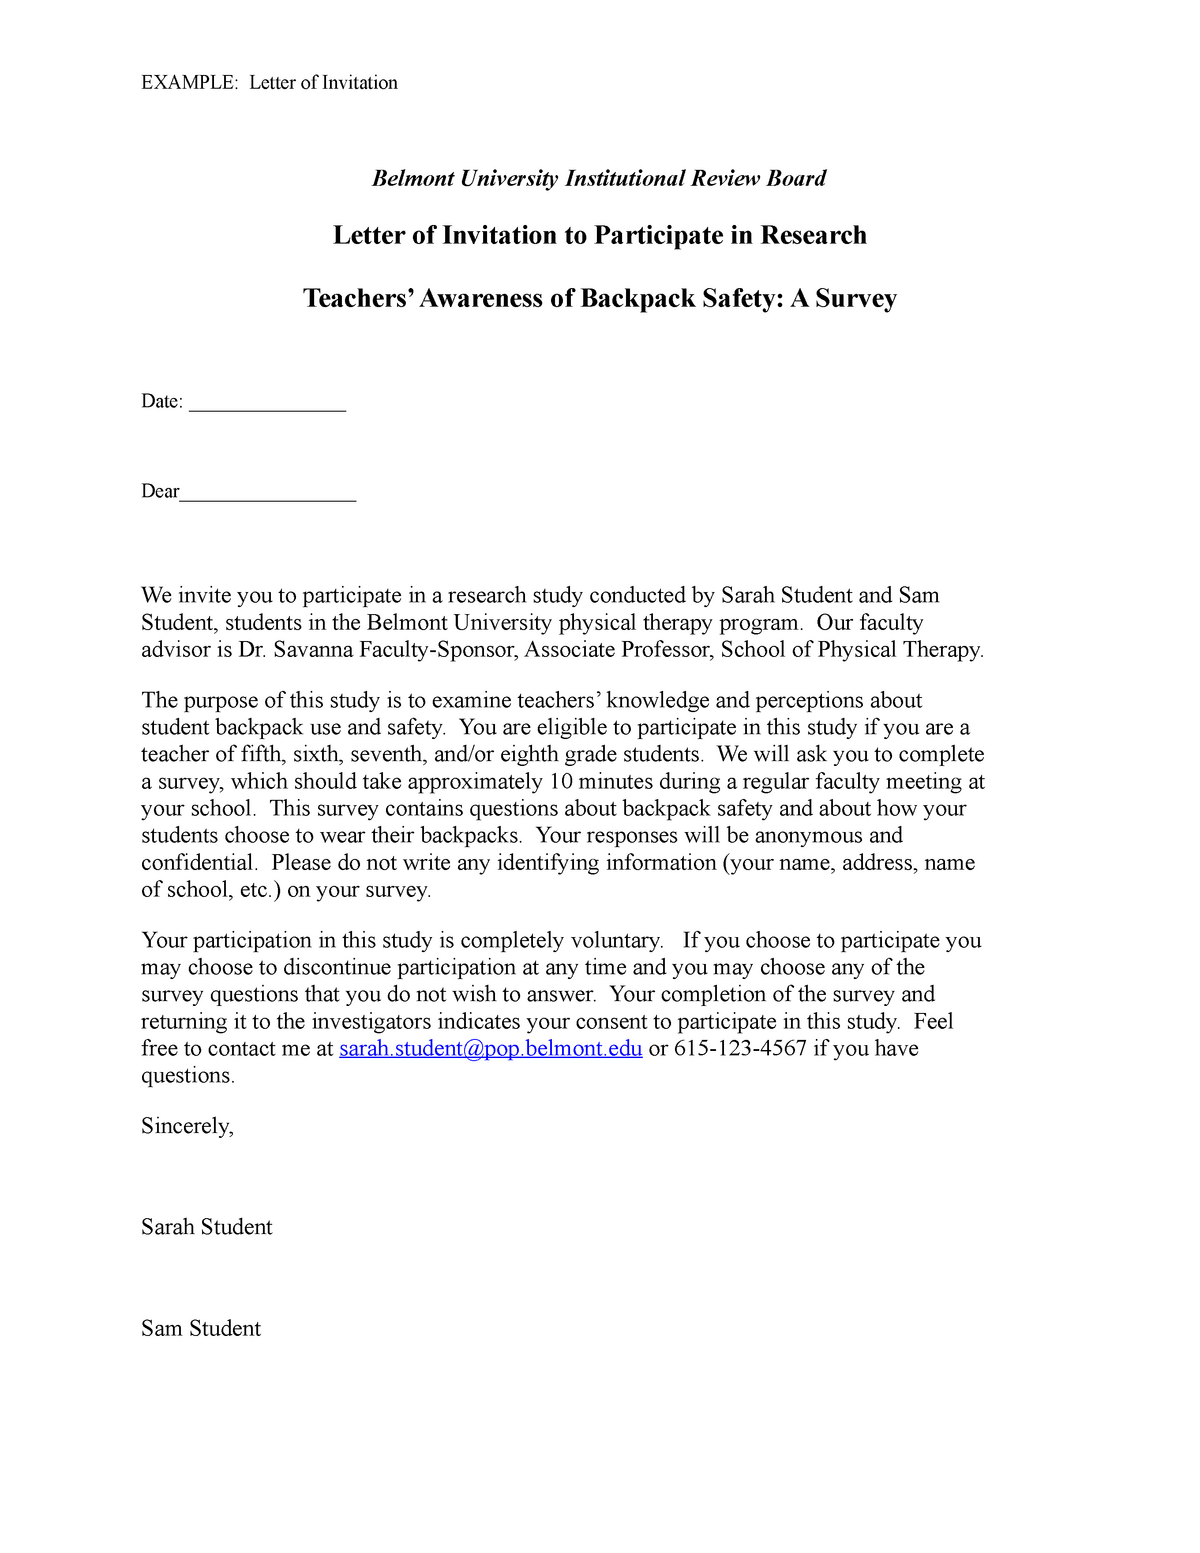 Letter Of Invitation (proposal of potential respondent) - EXAMPLE: Letter of Invitation Belmont